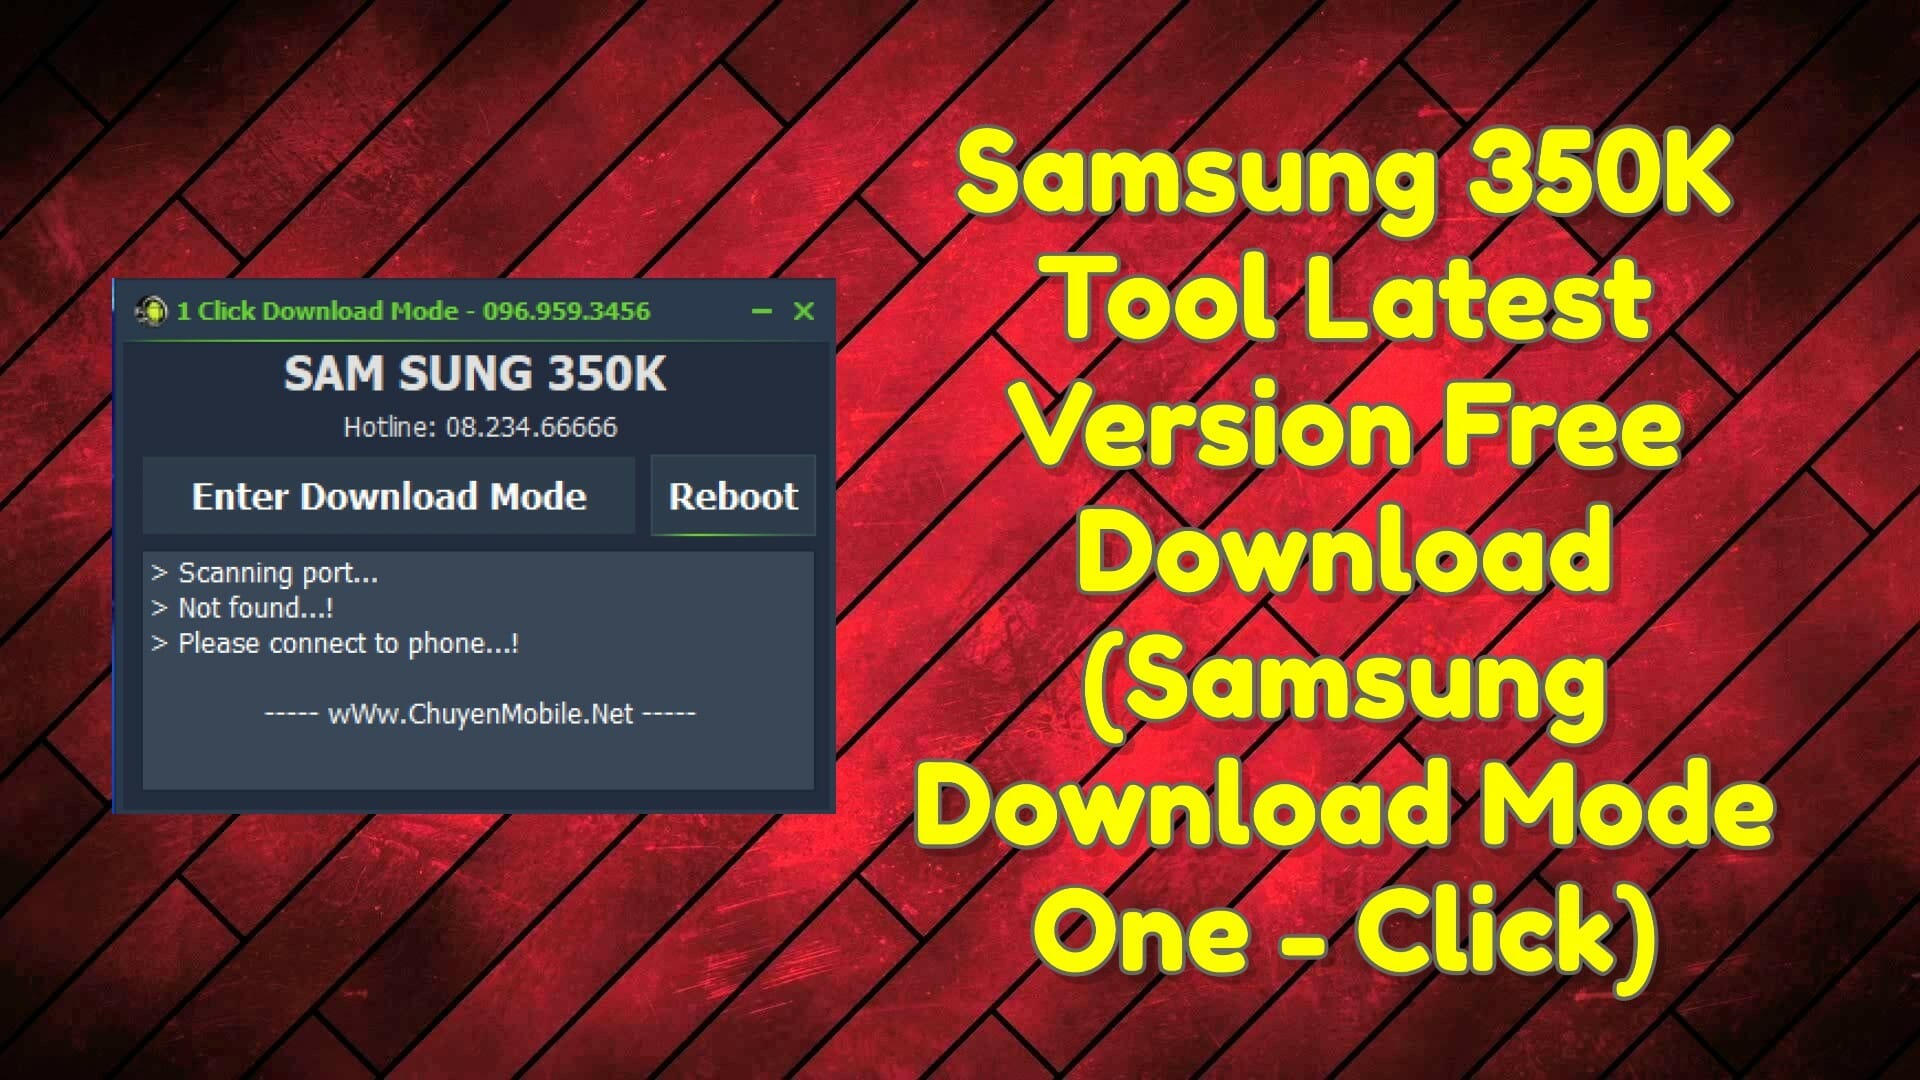 Samsung 350k tool latest version free download (samsung download mode one - click)